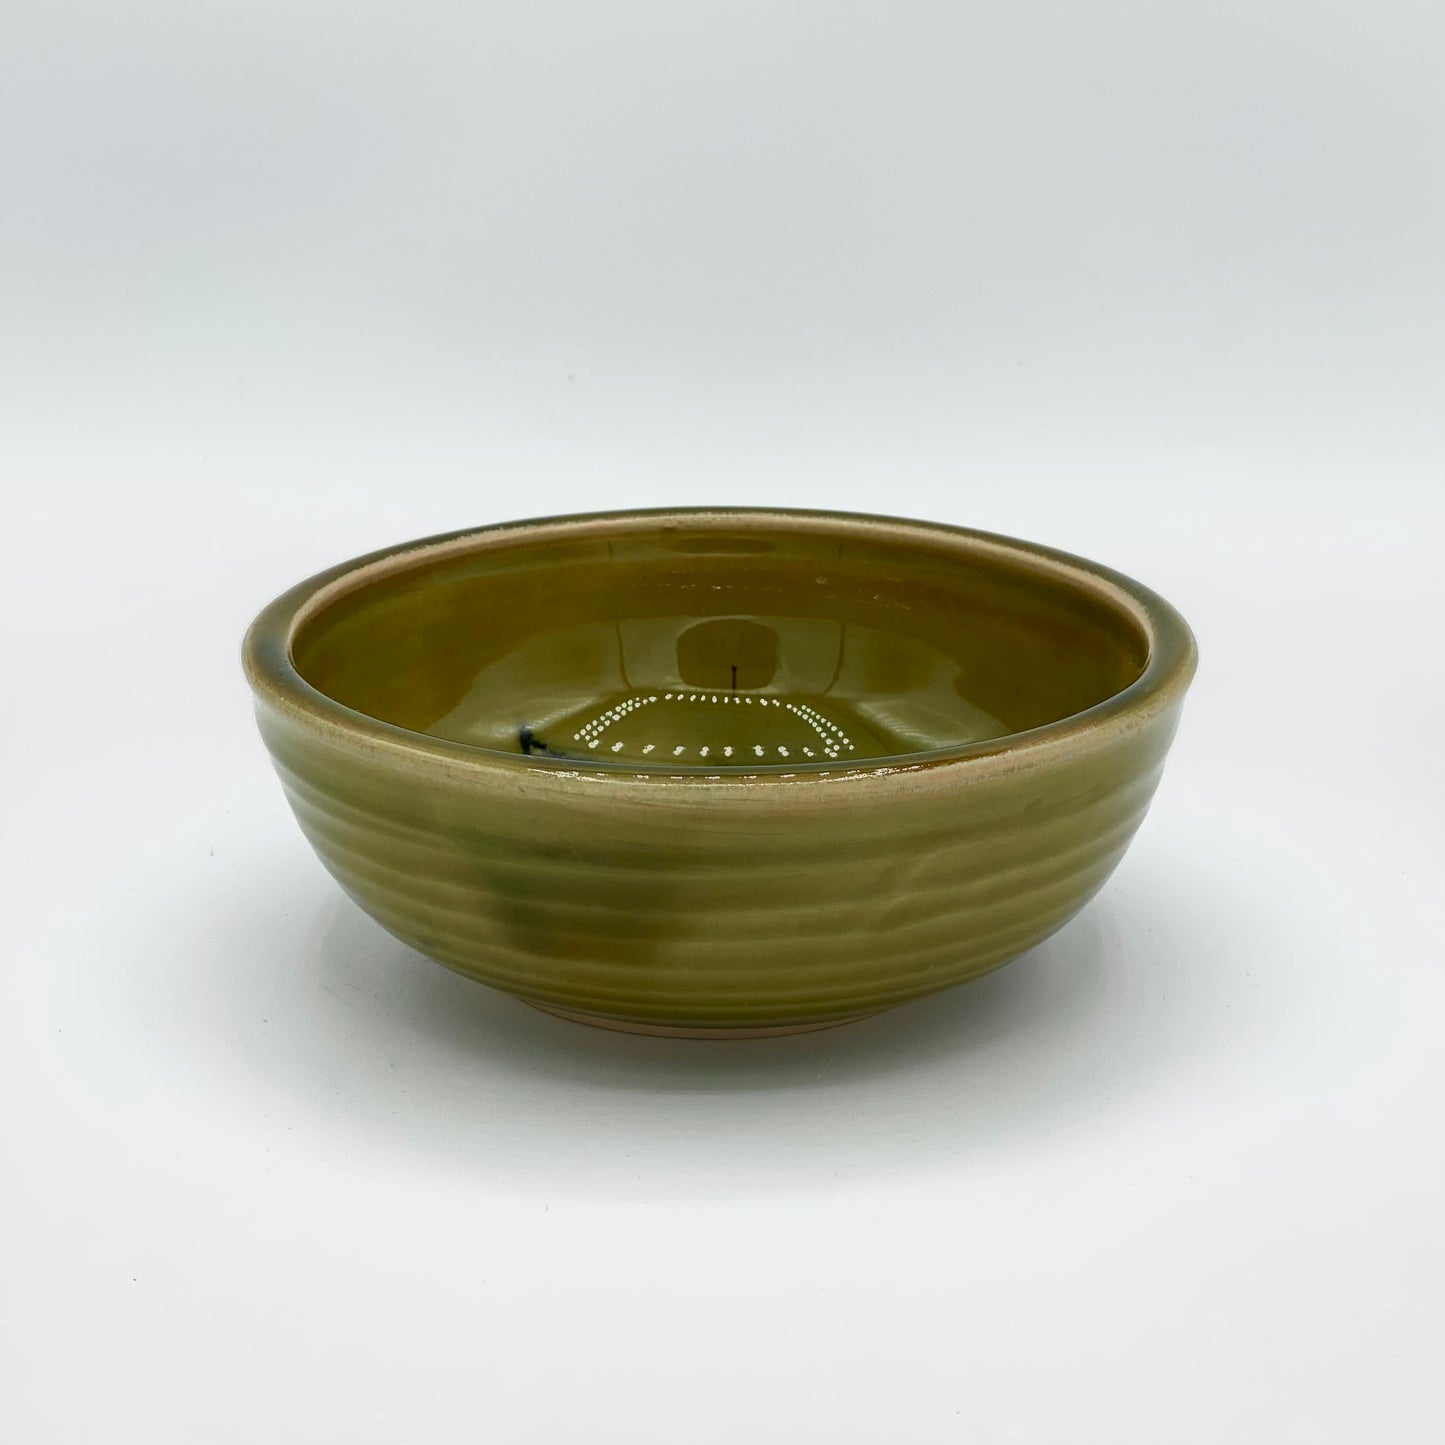 Bowl by Greig Pottery